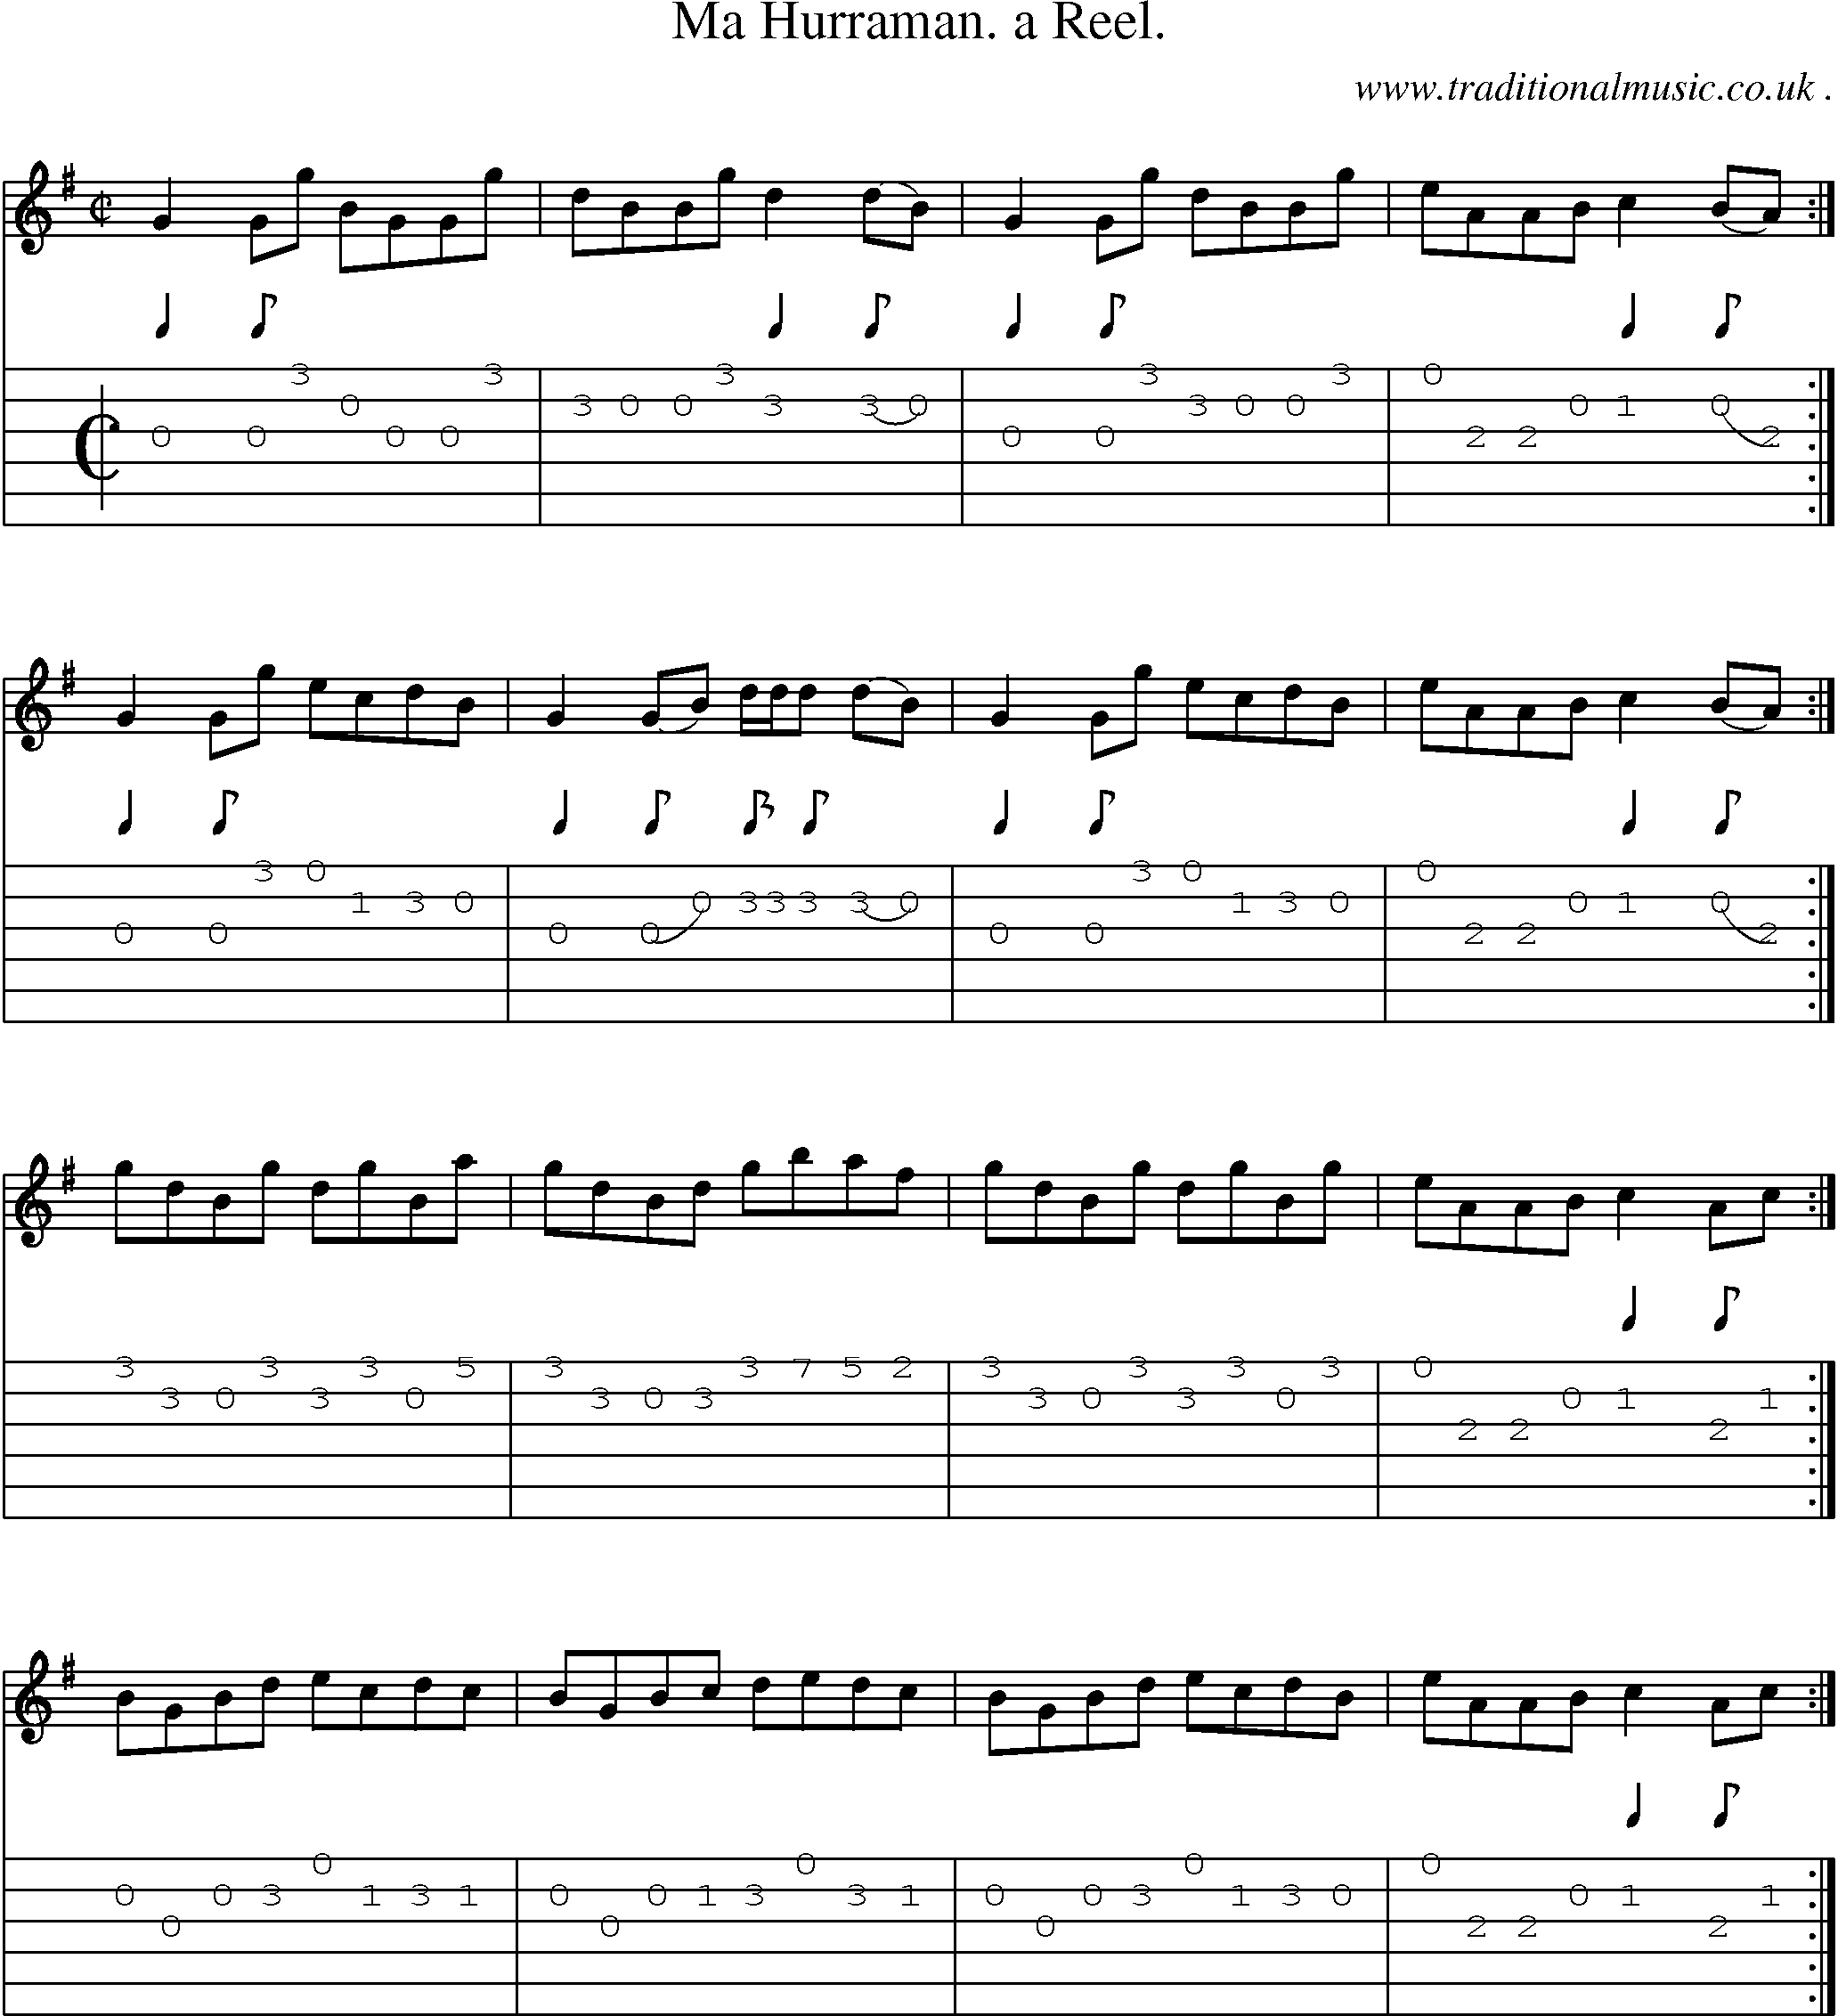 Sheet-Music and Guitar Tabs for Ma Hurraman A Reel